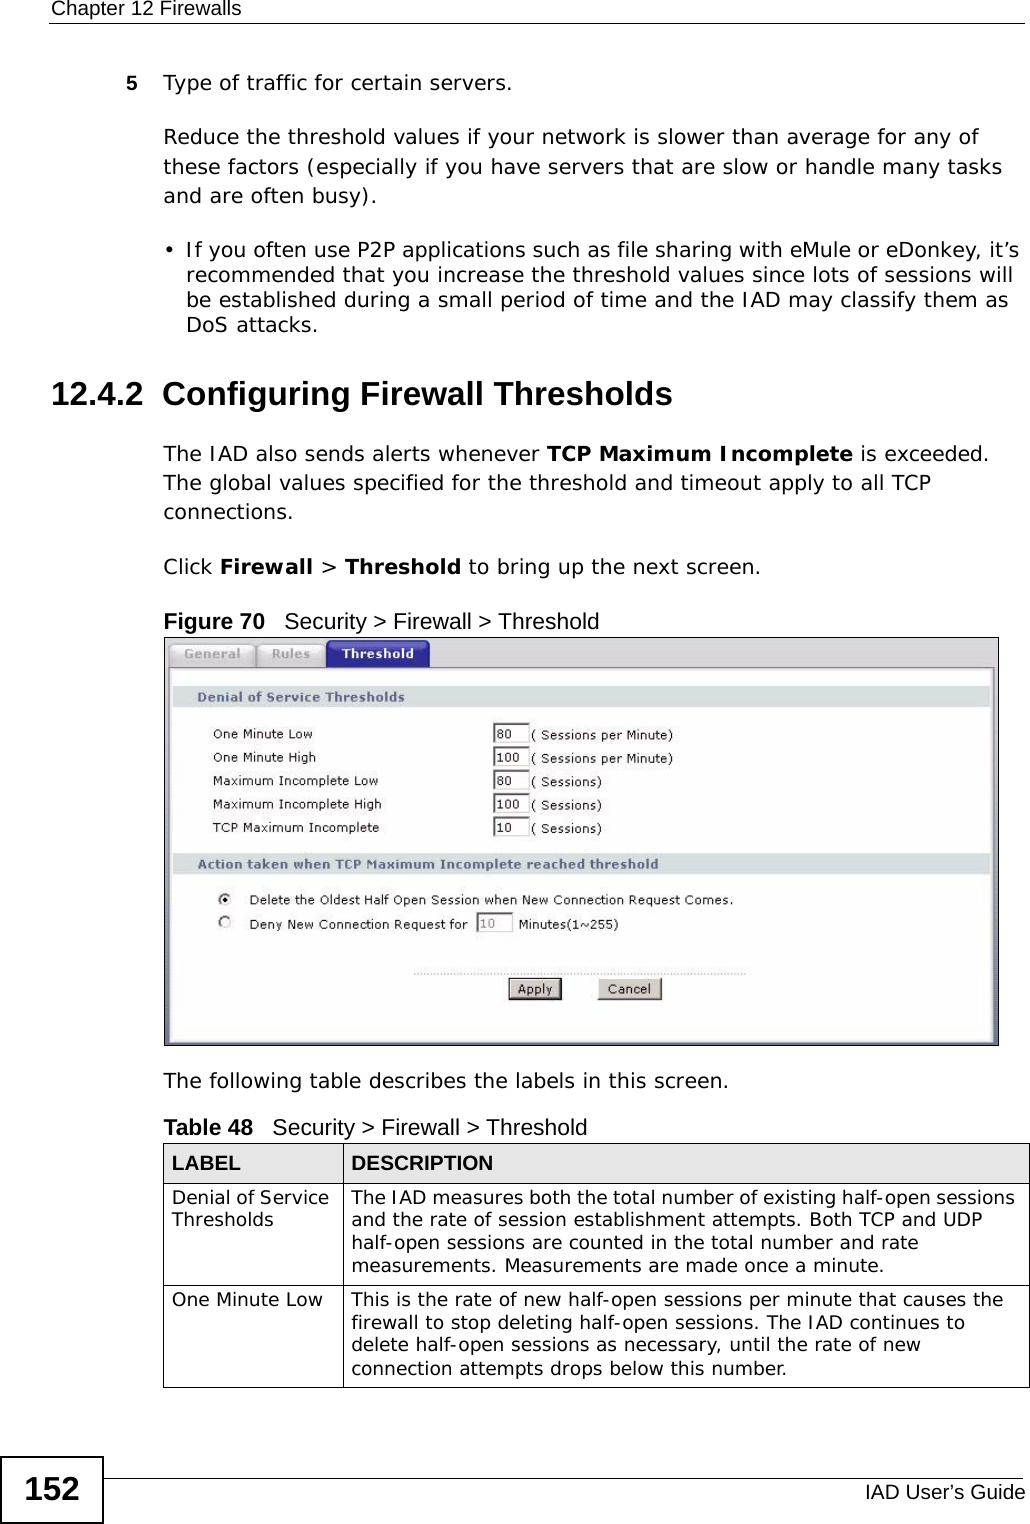 Chapter 12 FirewallsIAD User’s Guide1525Type of traffic for certain servers.Reduce the threshold values if your network is slower than average for any of these factors (especially if you have servers that are slow or handle many tasks and are often busy). • If you often use P2P applications such as file sharing with eMule or eDonkey, it’s recommended that you increase the threshold values since lots of sessions will be established during a small period of time and the IAD may classify them as DoS attacks. 12.4.2  Configuring Firewall ThresholdsThe IAD also sends alerts whenever TCP Maximum Incomplete is exceeded. The global values specified for the threshold and timeout apply to all TCP connections. Click Firewall &gt; Threshold to bring up the next screen.Figure 70   Security &gt; Firewall &gt; ThresholdThe following table describes the labels in this screen. Table 48   Security &gt; Firewall &gt; ThresholdLABEL DESCRIPTIONDenial of Service Thresholds The IAD measures both the total number of existing half-open sessions and the rate of session establishment attempts. Both TCP and UDP half-open sessions are counted in the total number and rate measurements. Measurements are made once a minute.One Minute Low This is the rate of new half-open sessions per minute that causes the firewall to stop deleting half-open sessions. The IAD continues to delete half-open sessions as necessary, until the rate of new connection attempts drops below this number.